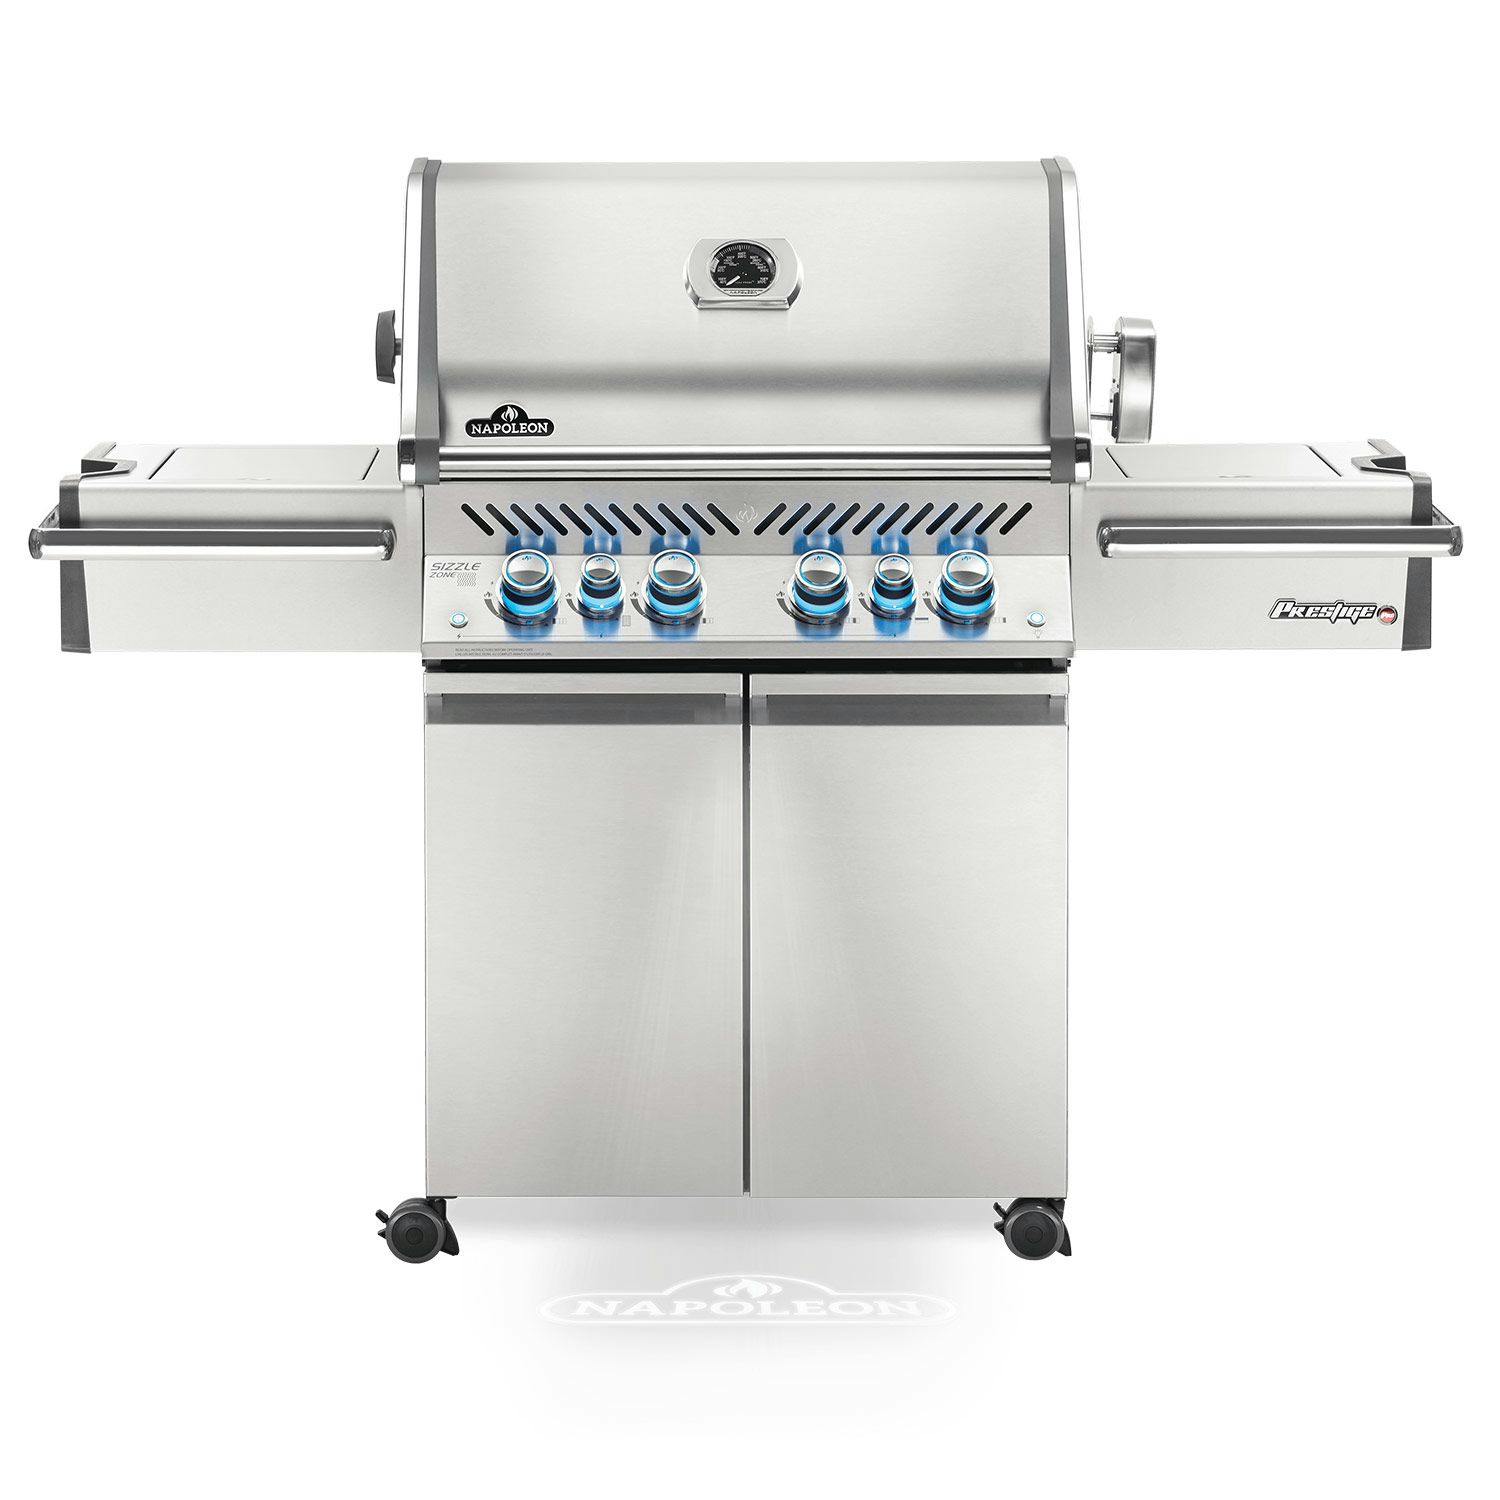 Product image of Napoleon Prestige PRO 500 Grill with Infrared Rear and Side Burners and Rotisserie Kit